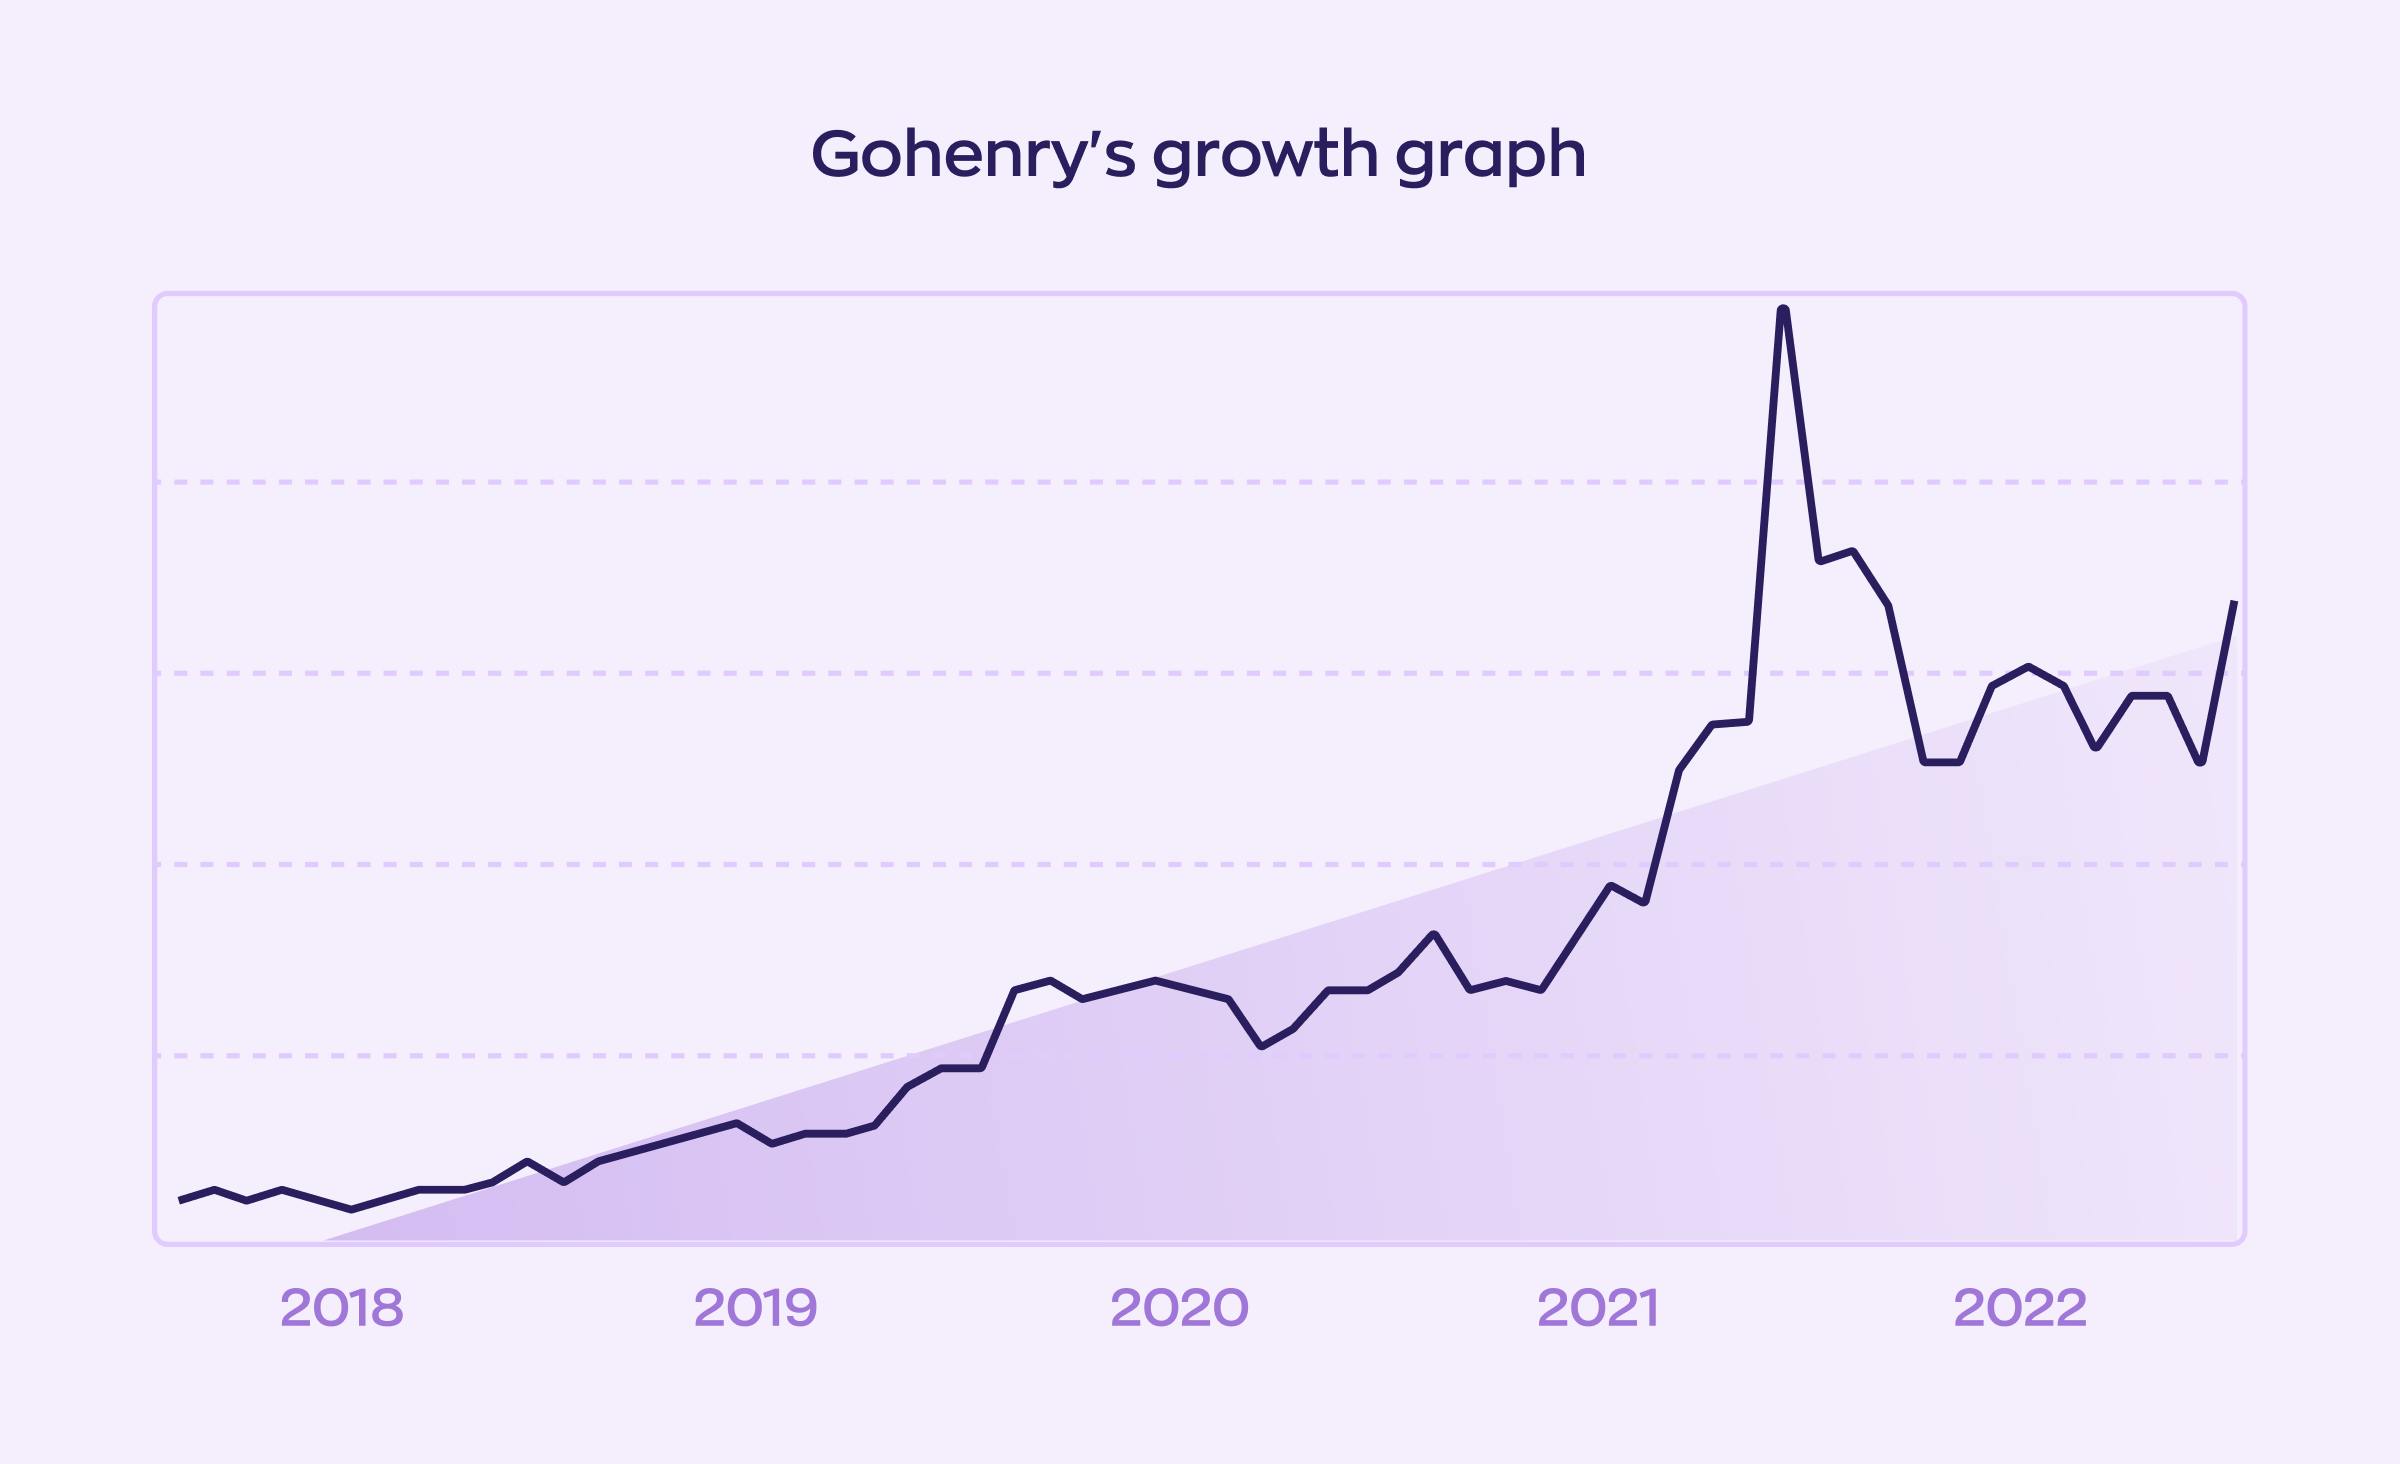 Gohenry’s 5-year growth reached 1260%.